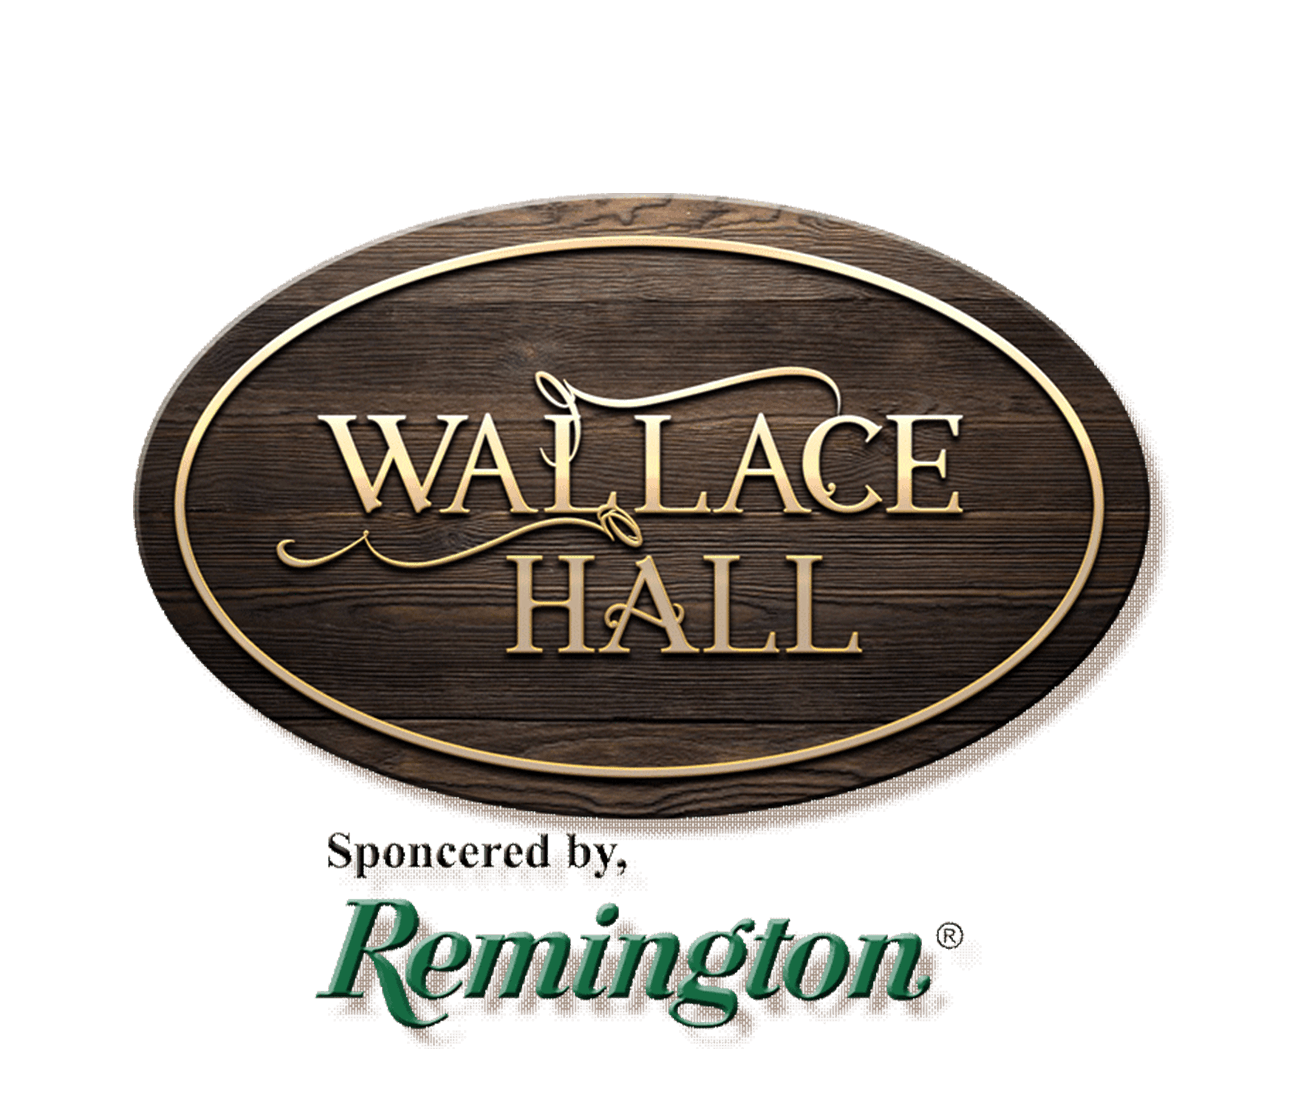 The Wallace Hall, Sponsored by Remington